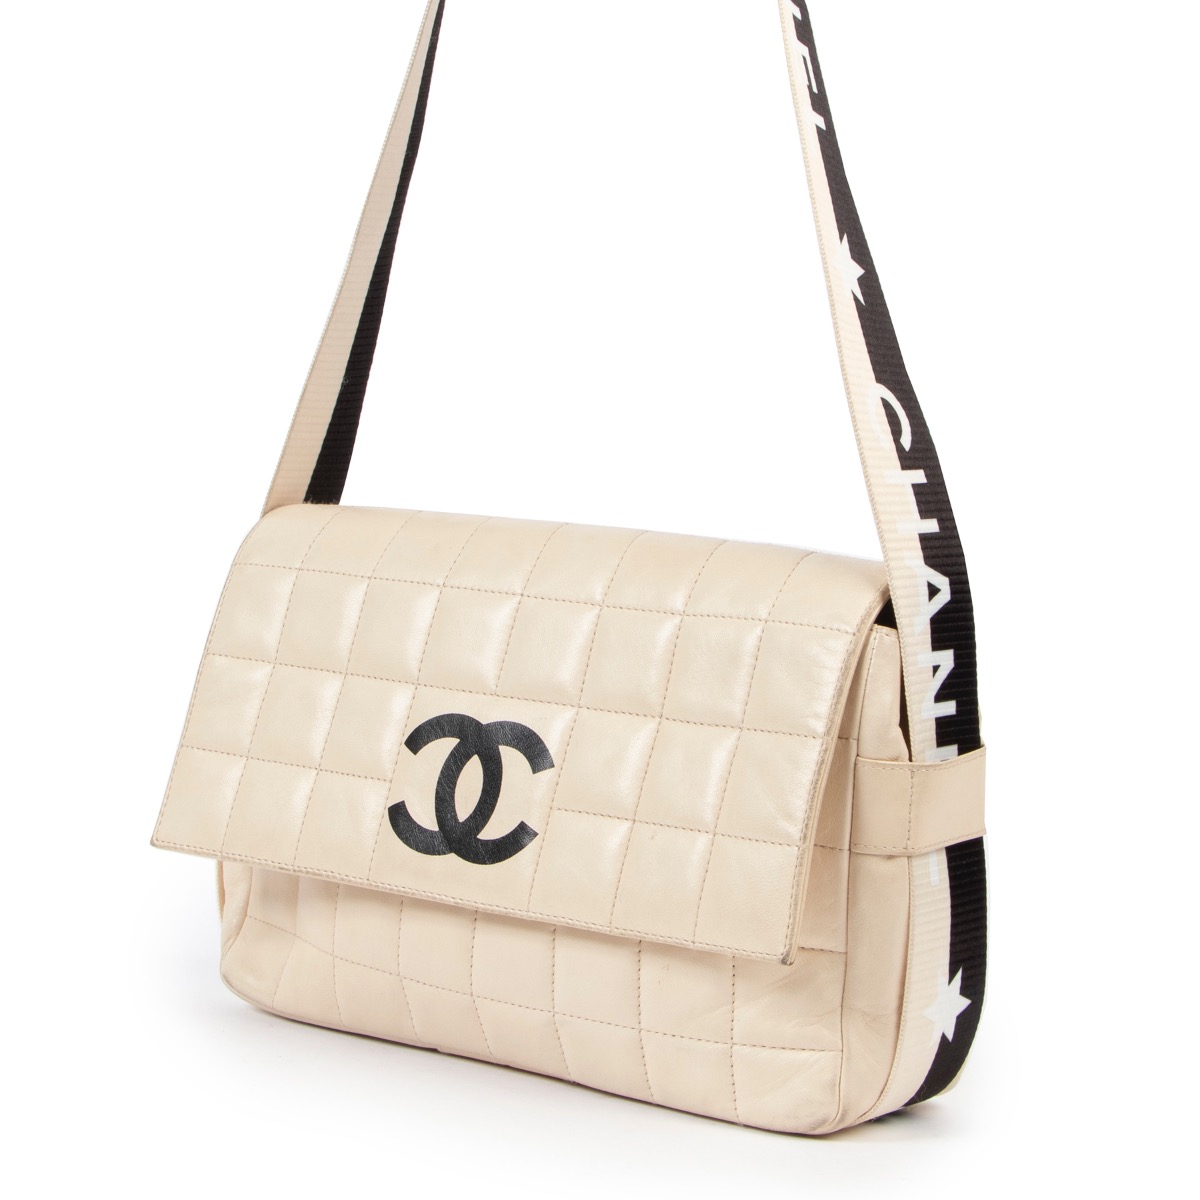 Chanel 22 leather crossbody bag Chanel White in Leather - 34260942